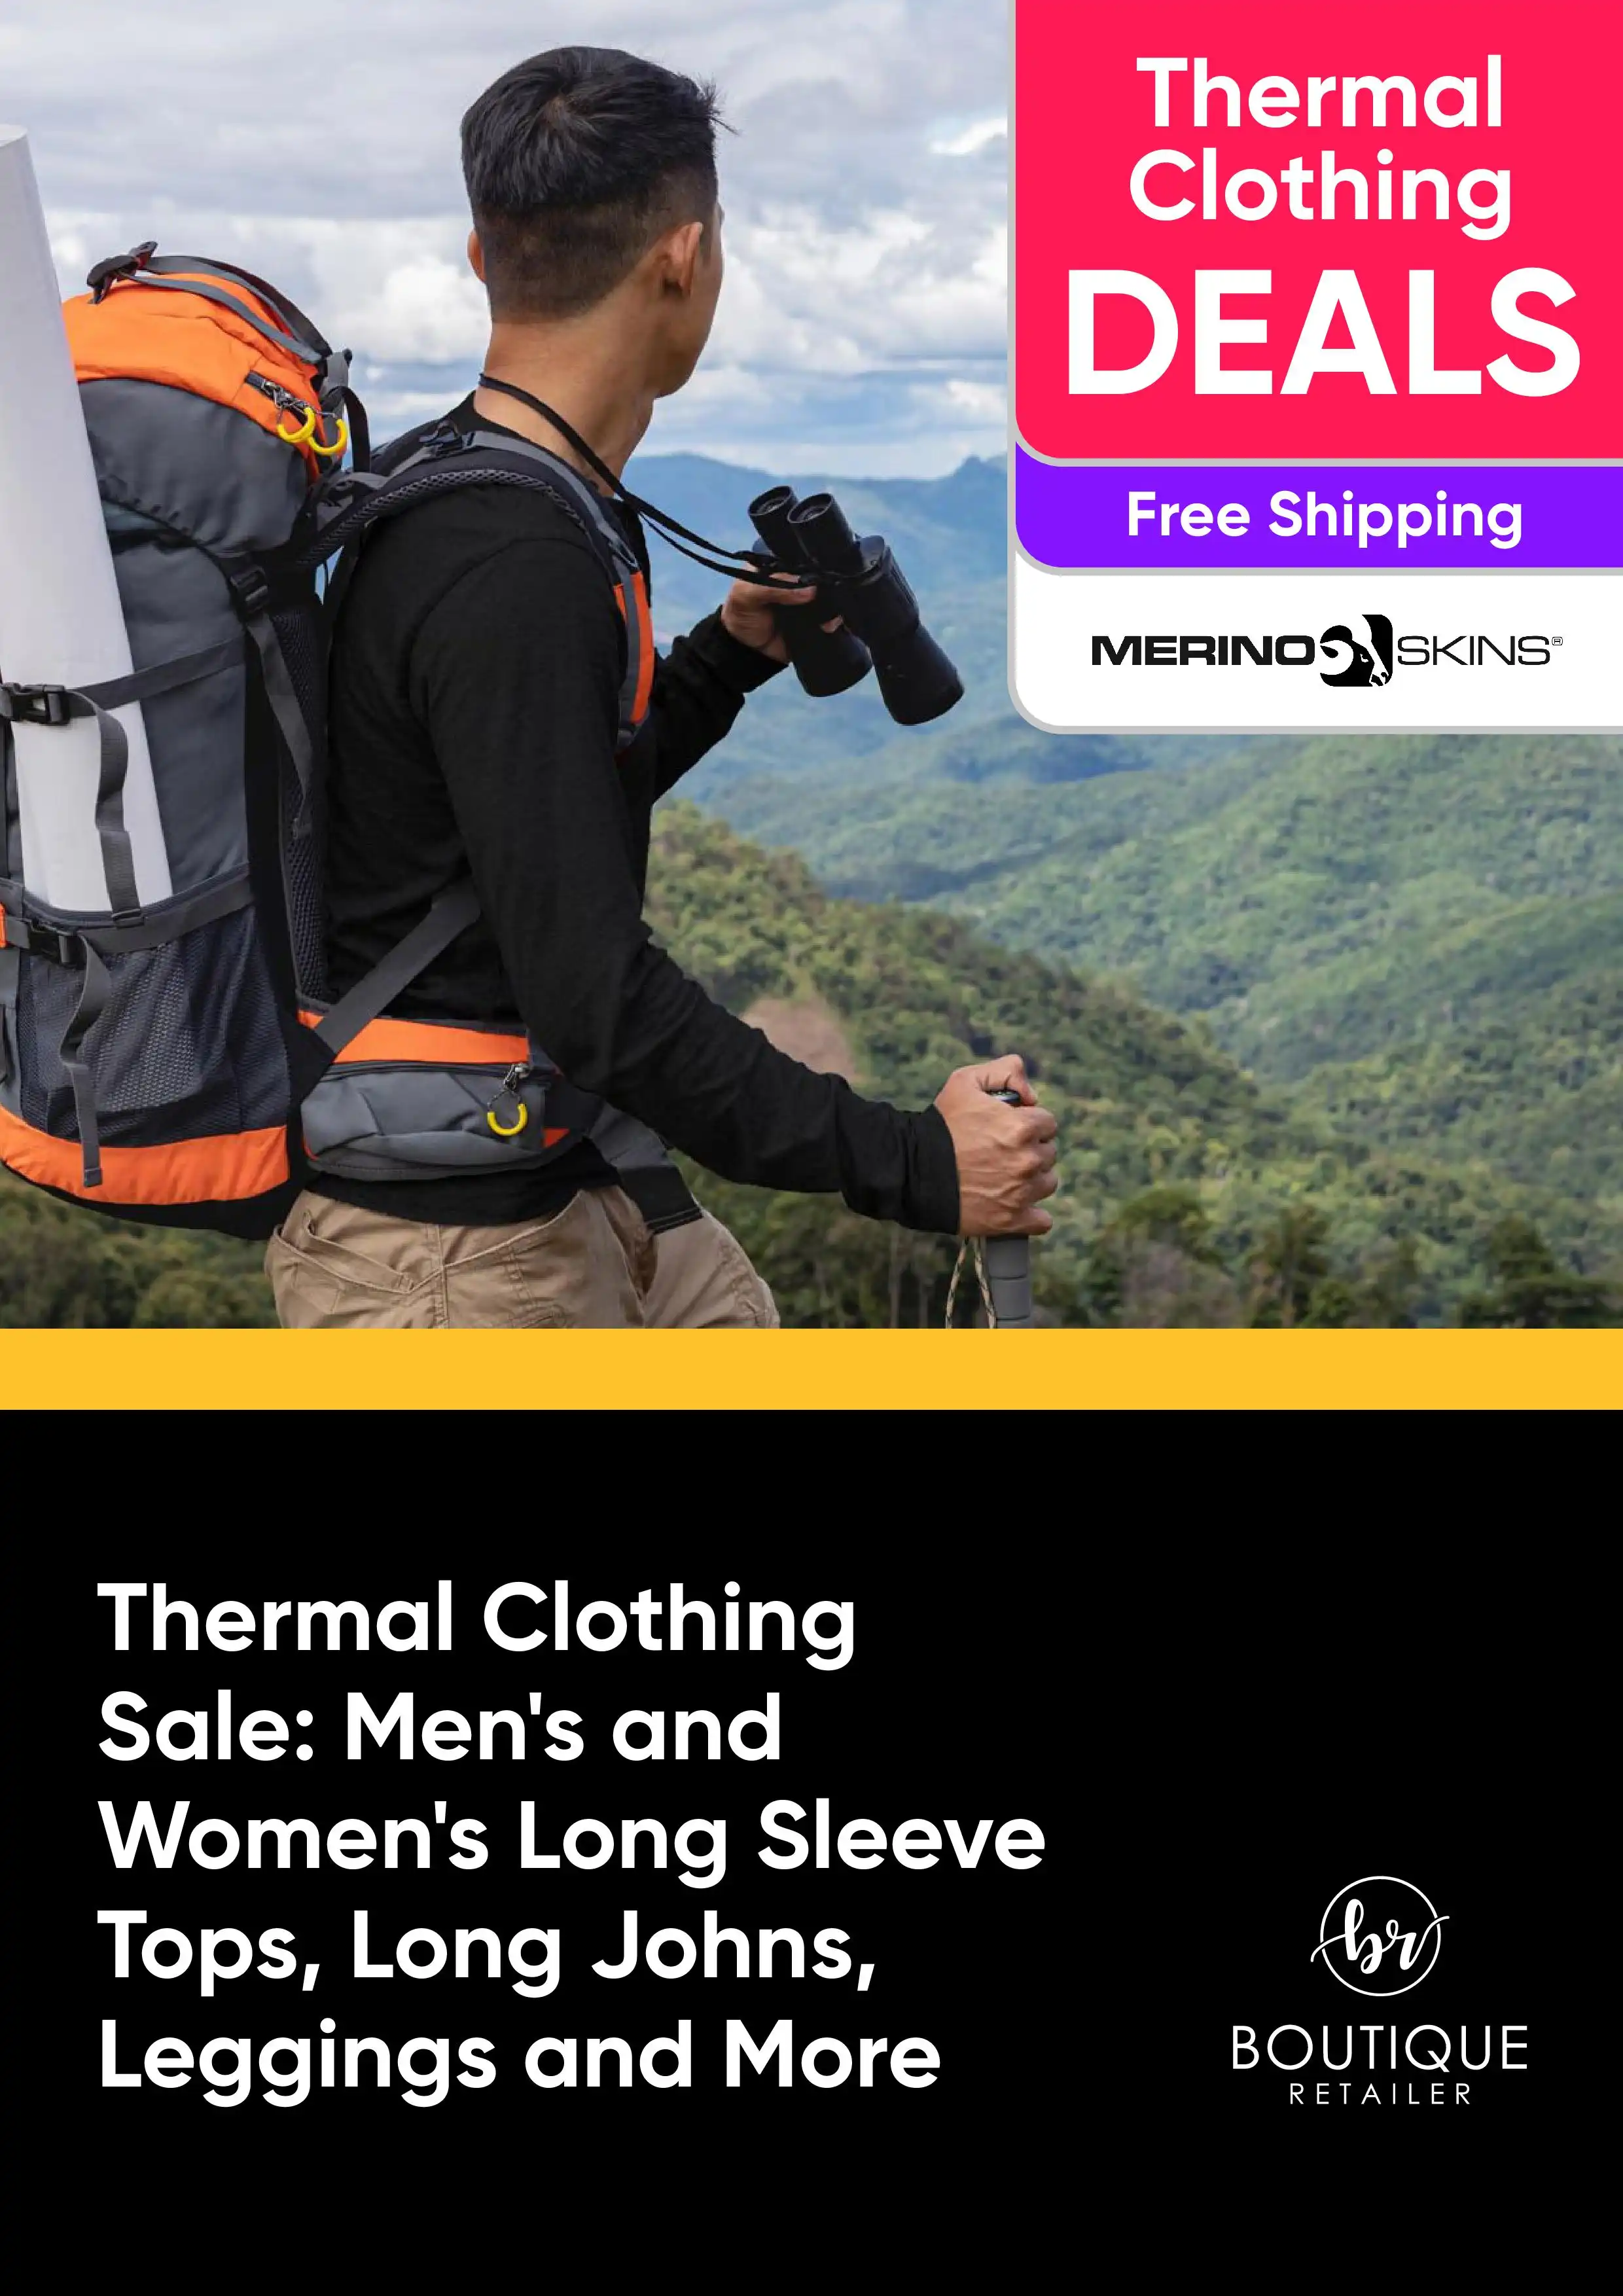 Thermal Clothing Sale - Men's and Women's Long Sleeve Tops, Long Johns, Leggings and More - Merino Skins - Free Shipping